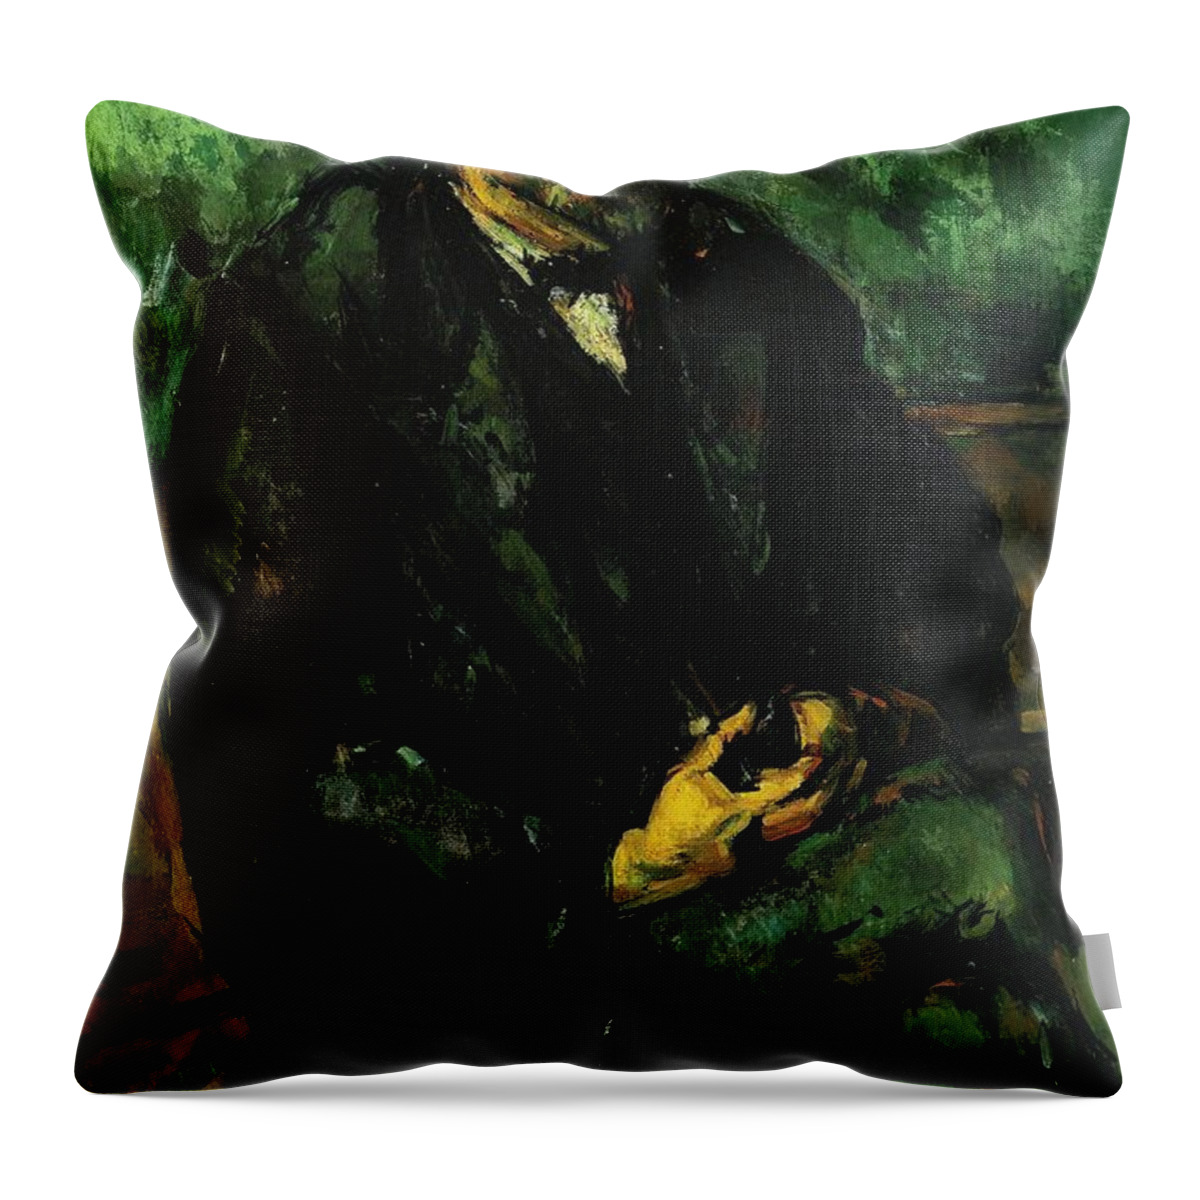 Paul Cezanne Throw Pillow featuring the painting Paul Cezanne / 'The Mariner', 1905, Oil on canvas, 107 x 74 cm. by Paul Cezanne -1839-1906-